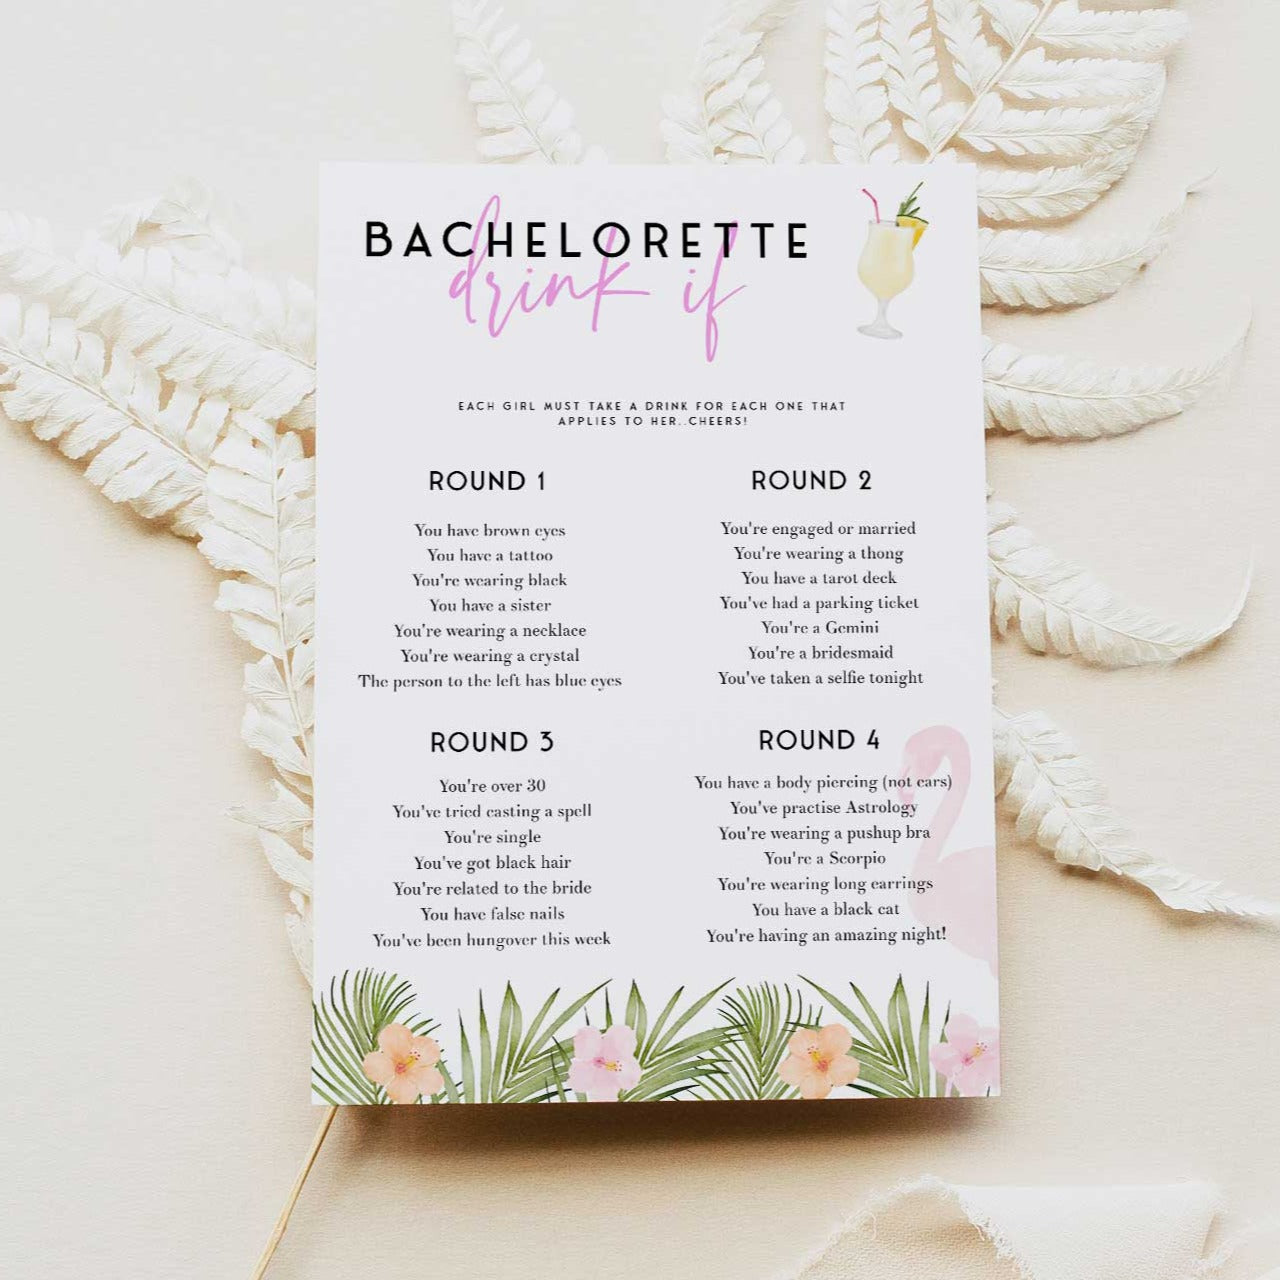 Fully editable and printable bachelorette drink if game with a miami design. Perfect for a miami, Bachelorette themed party